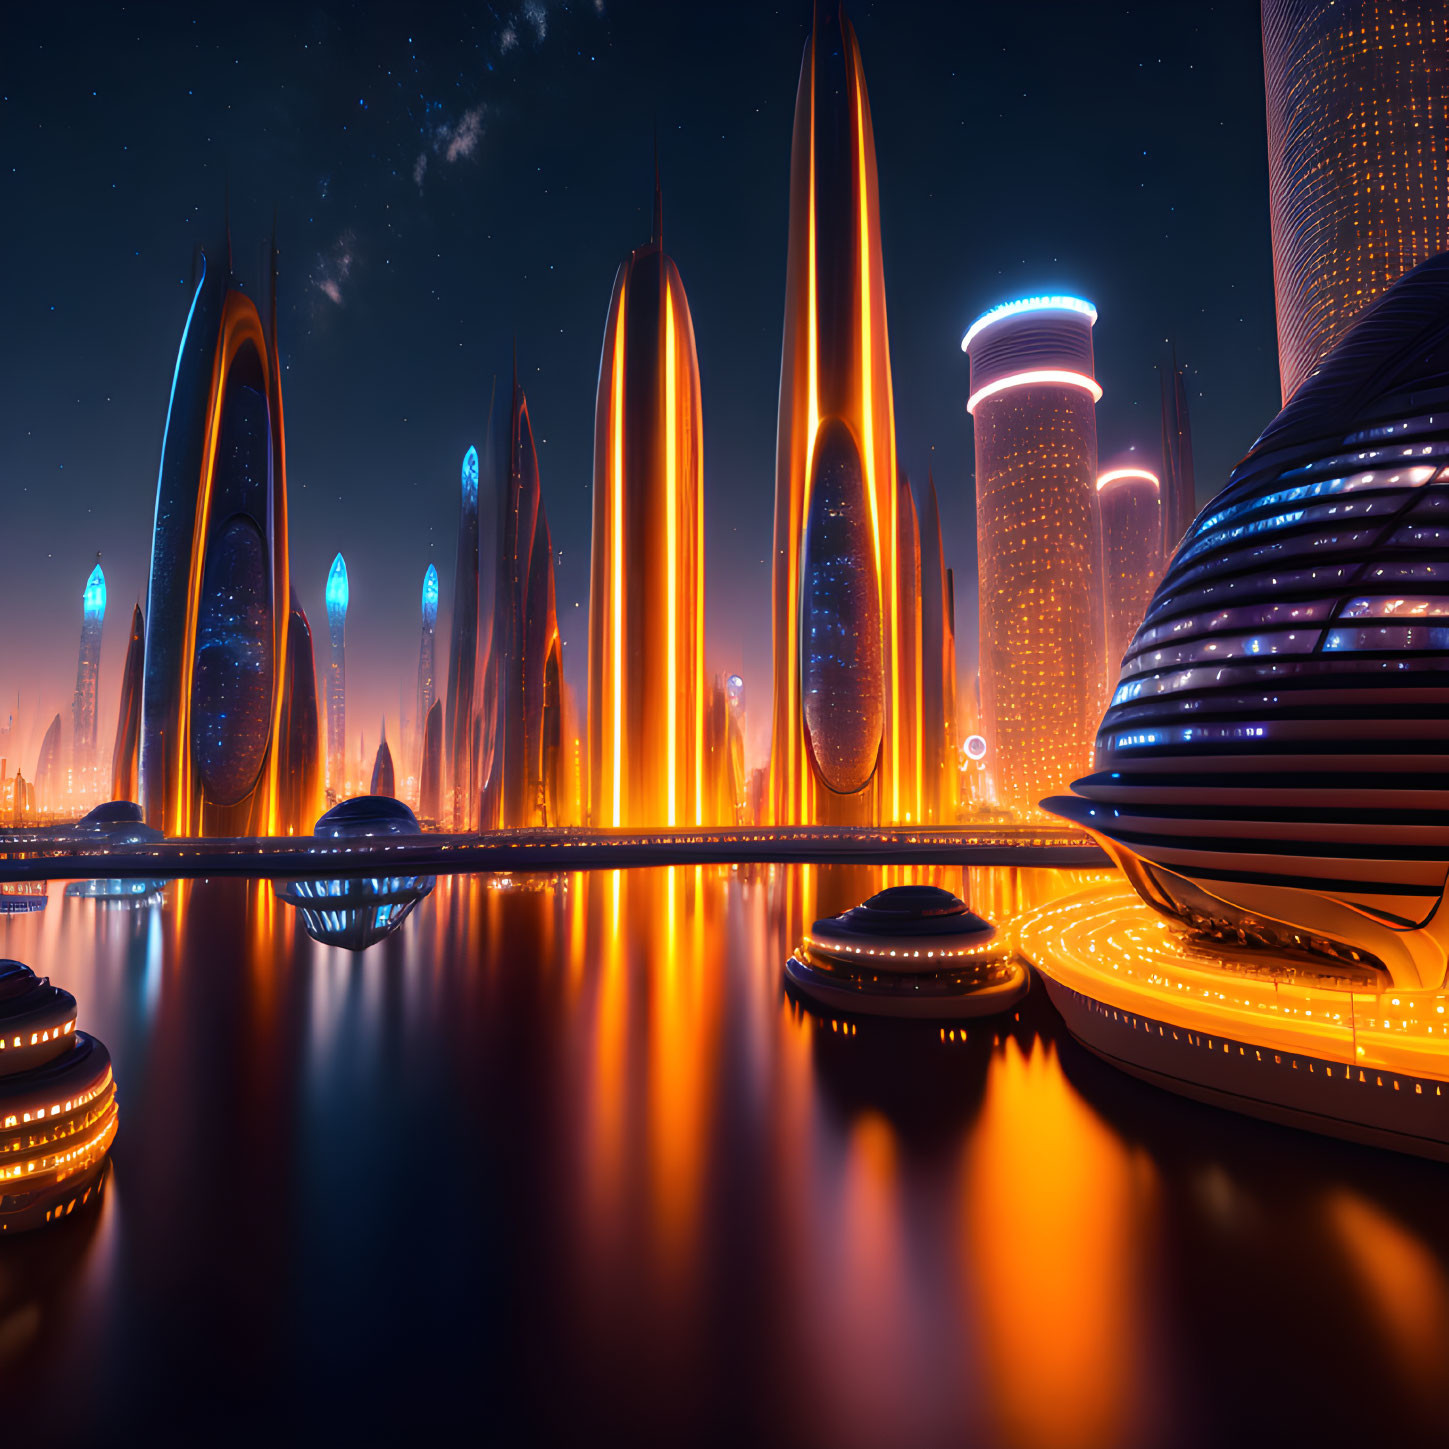 Futuristic cityscape at dusk with sleek skyscrapers and glowing roads